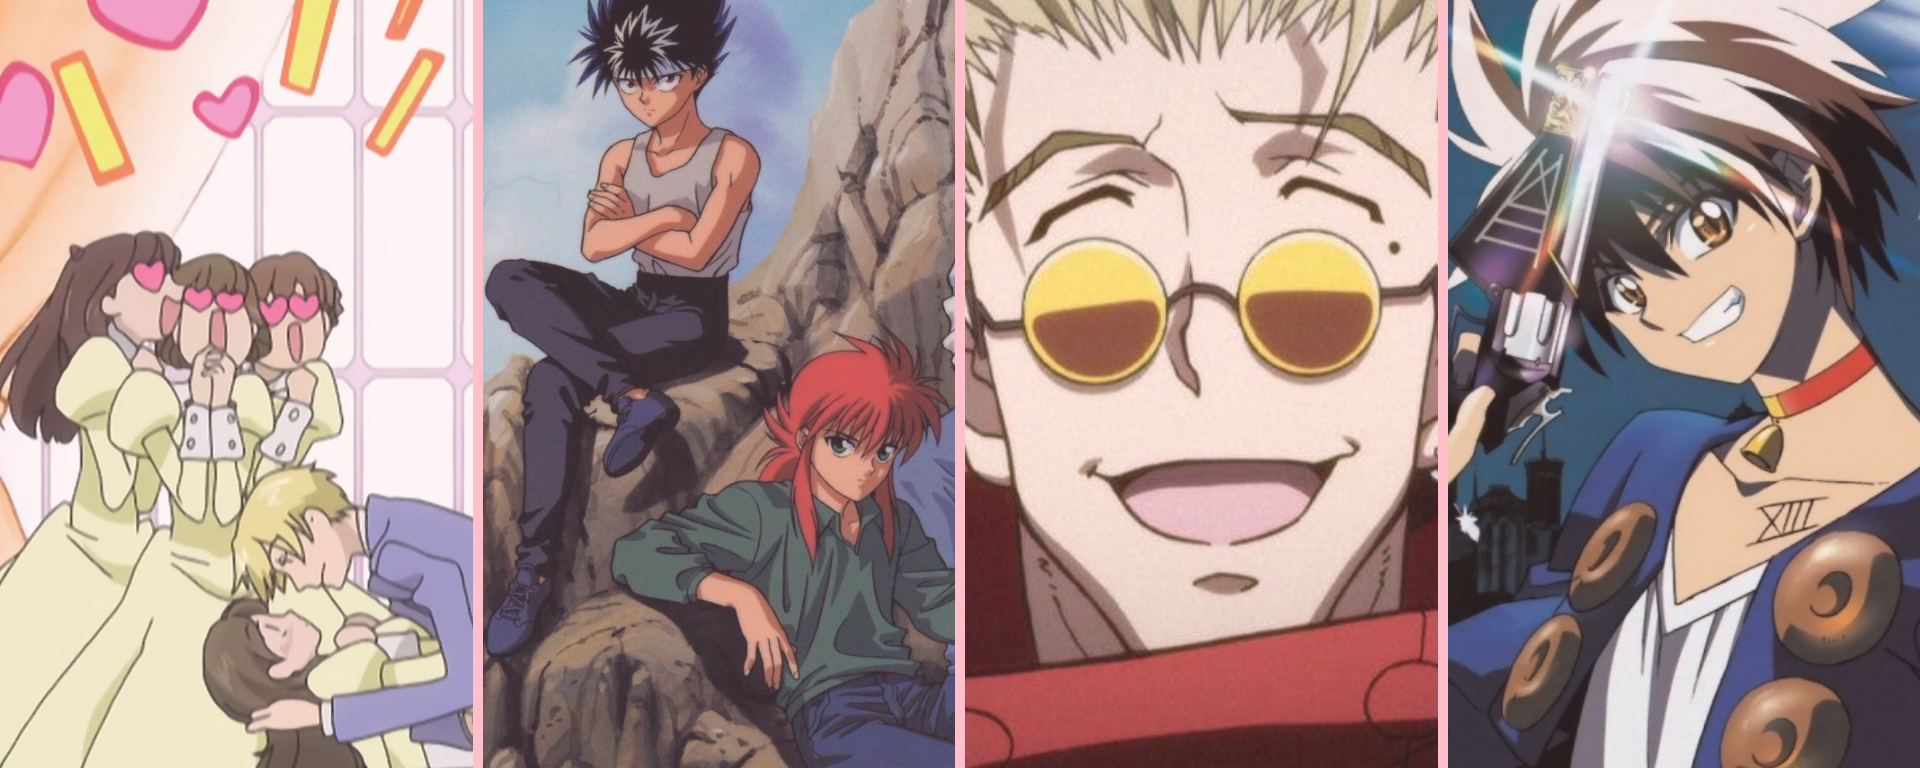 Grid of animes that deserve a reboot from left to right: Ouran Highschool Host Club, Yu Yu Hakusho, Trigun, Black Cats